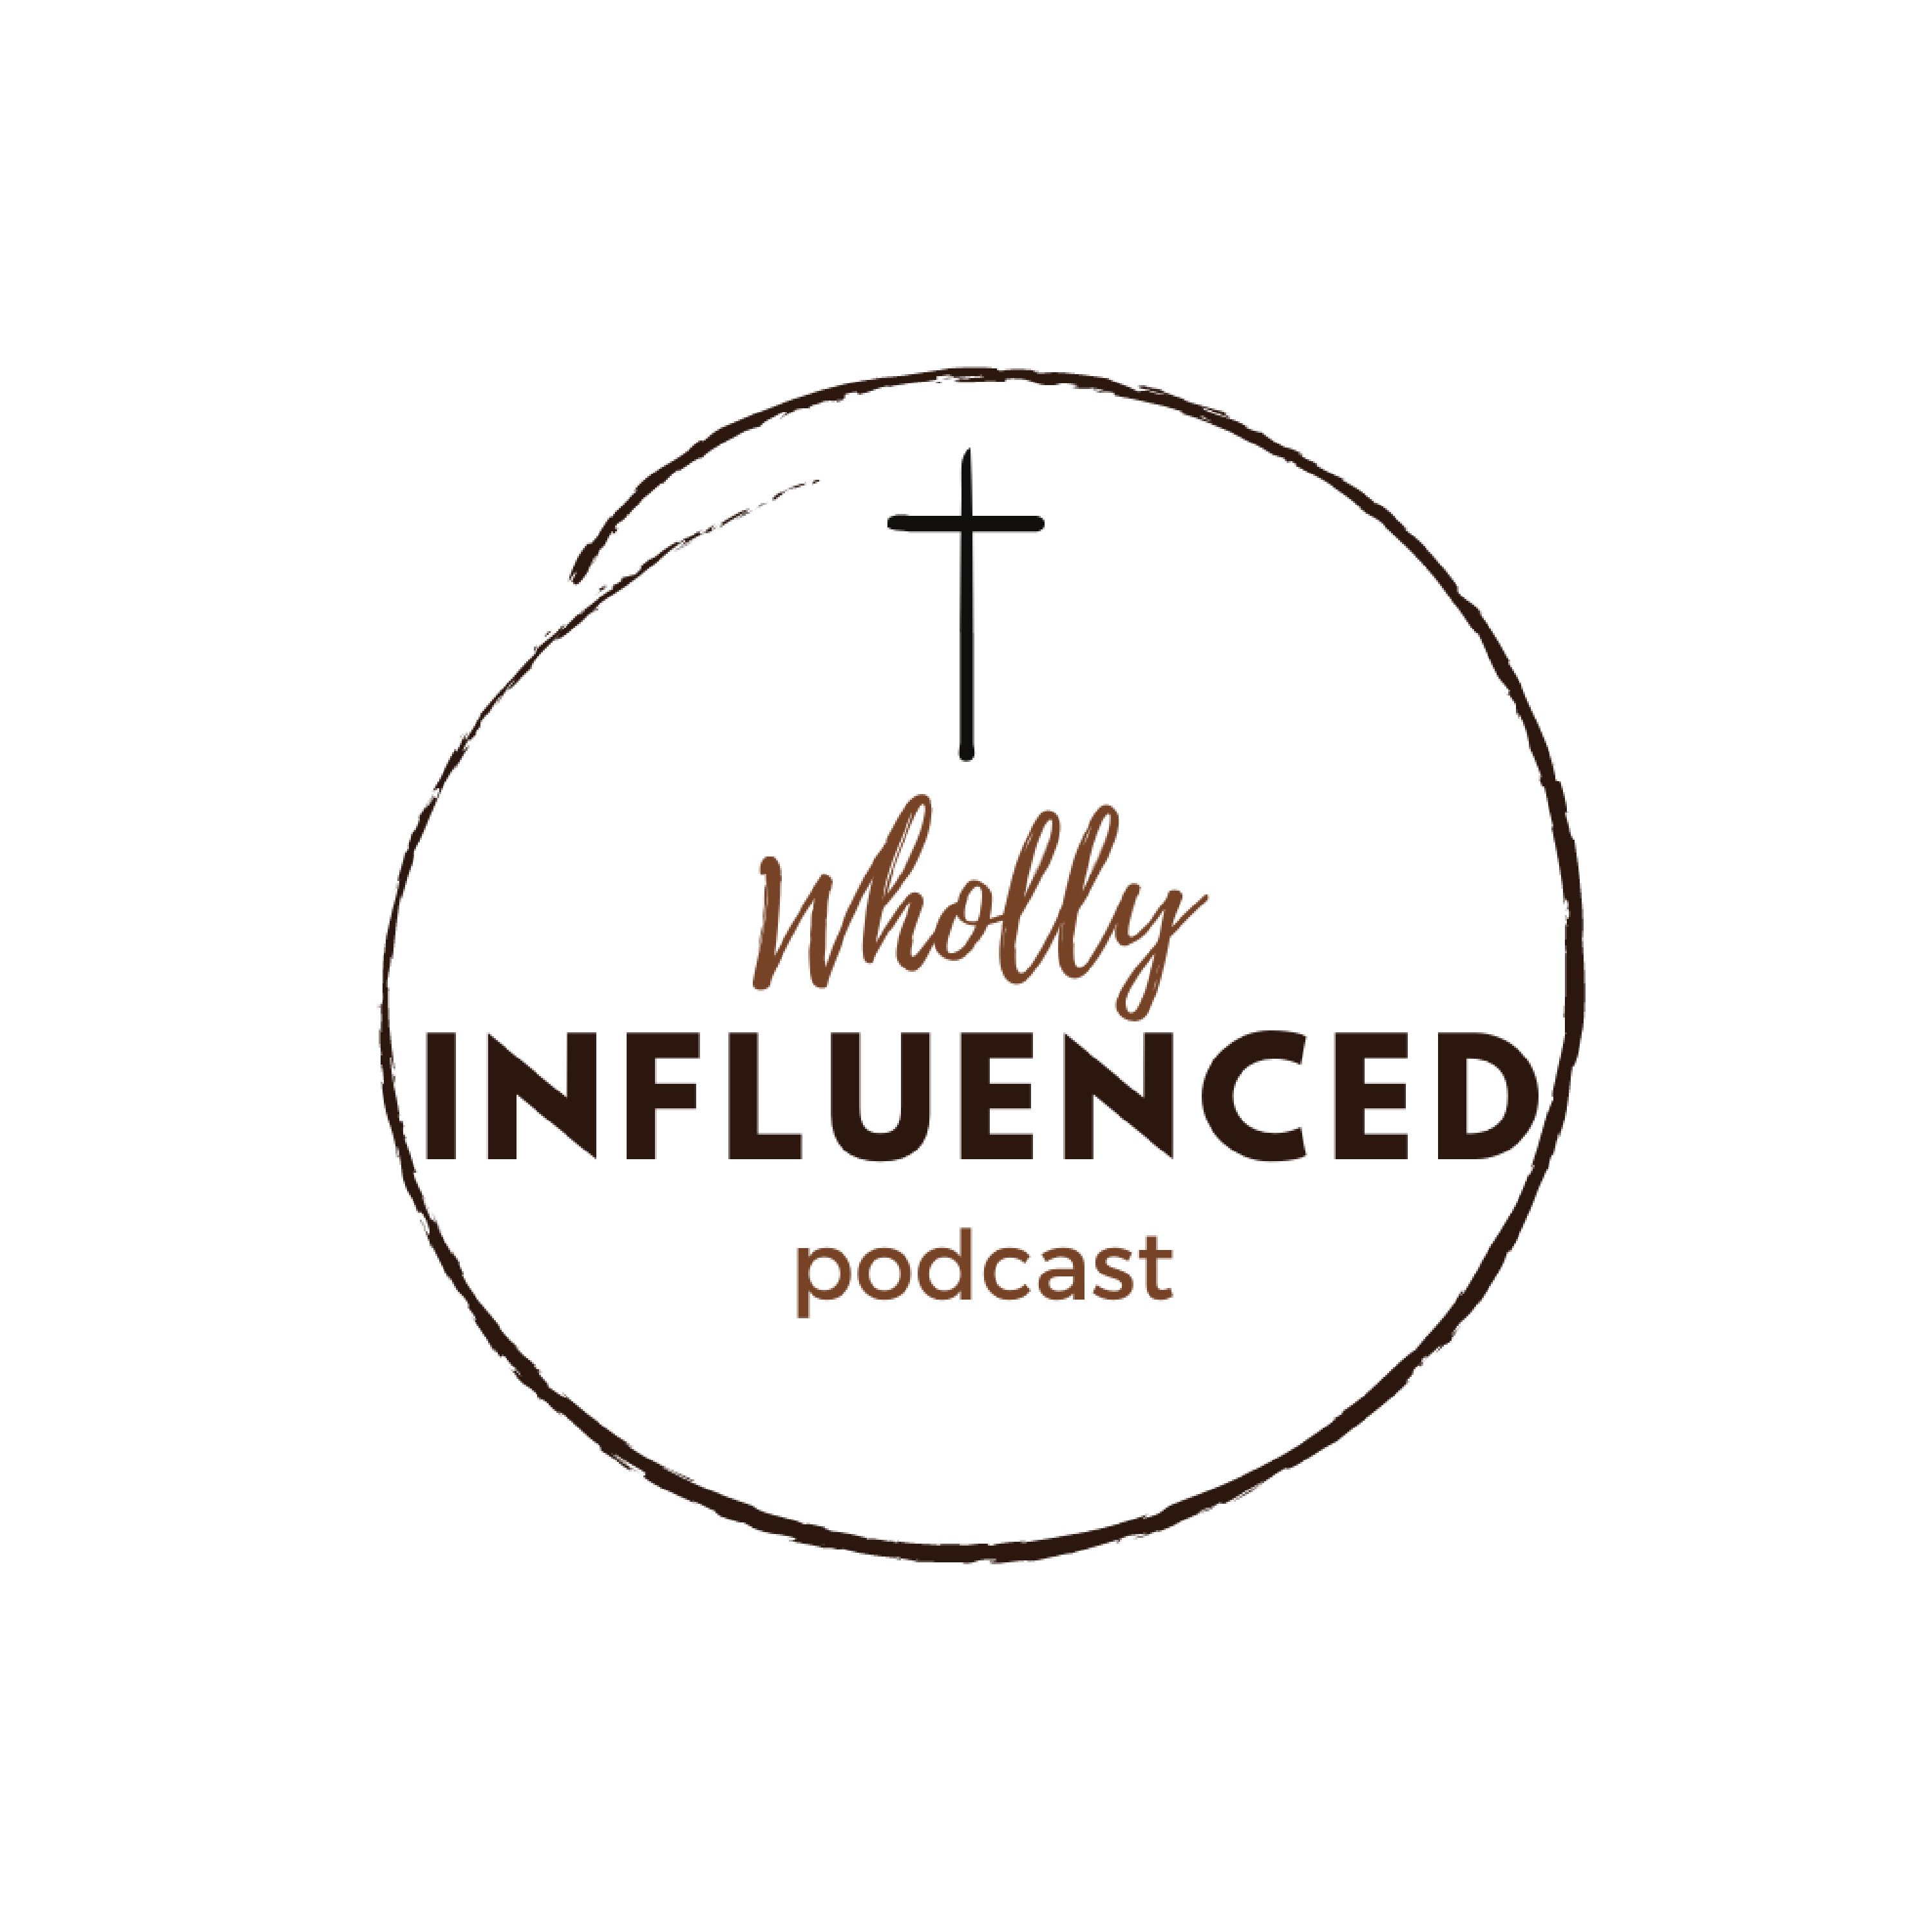 Wholly Influenced Podcast